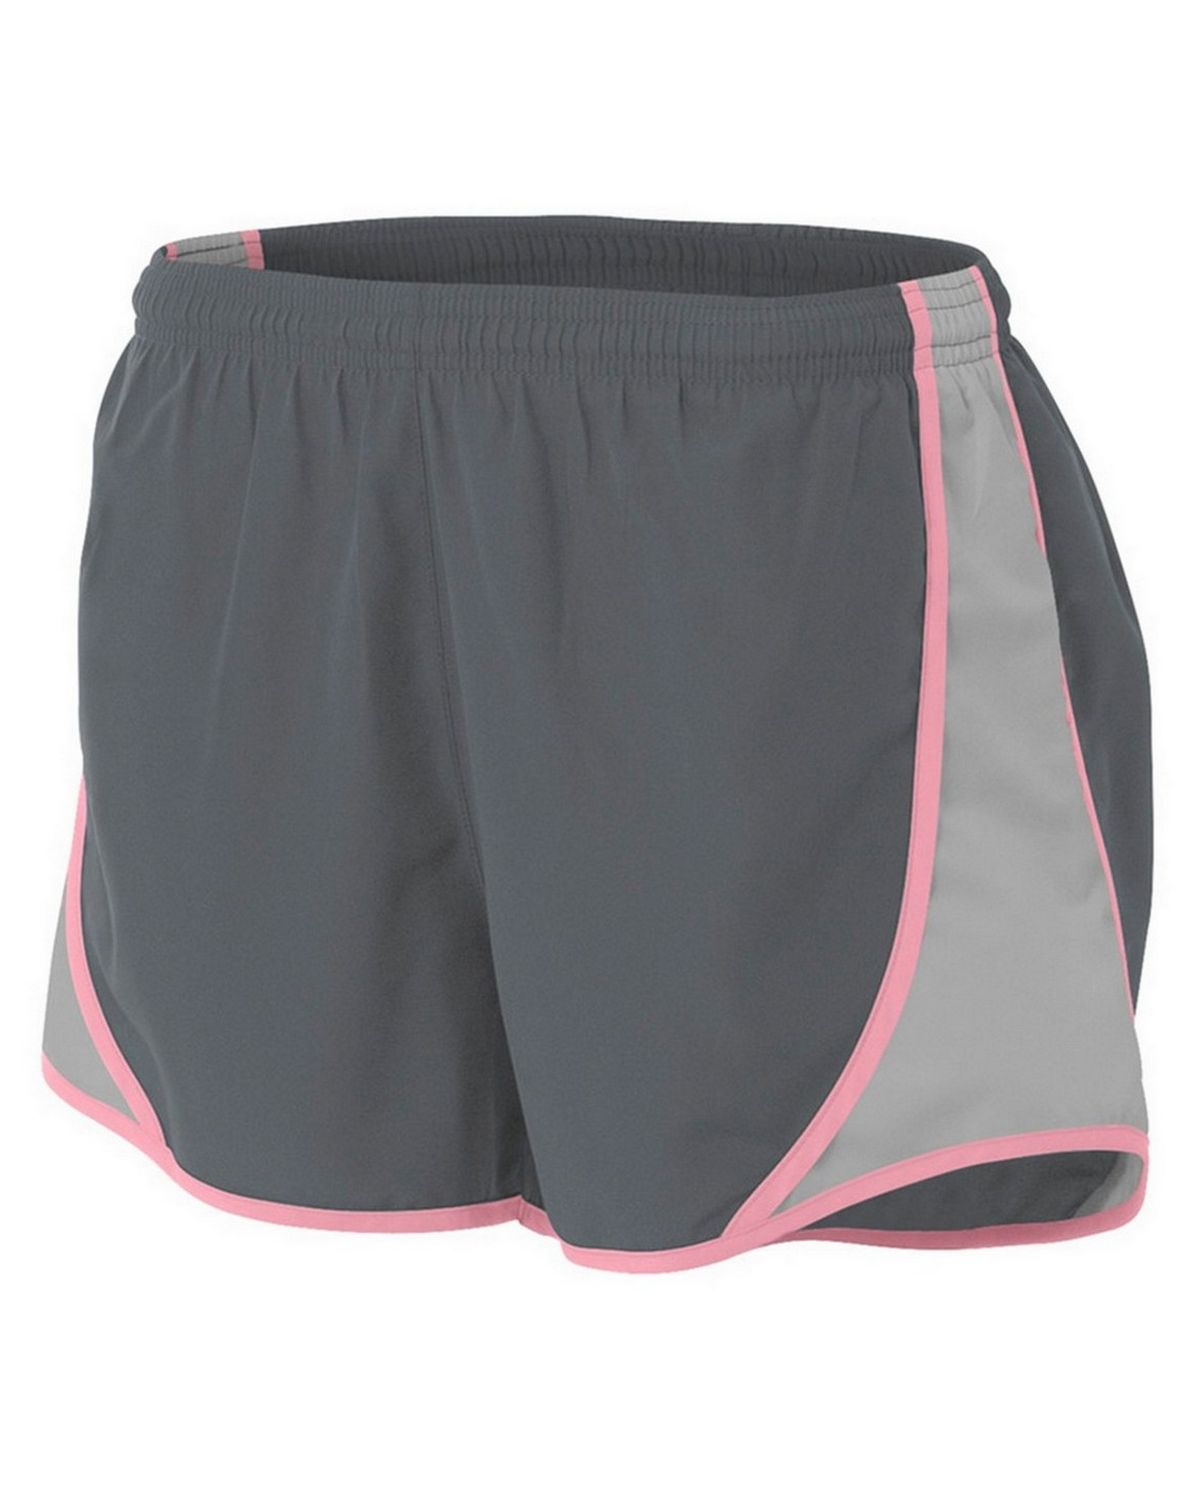 A4 NW5341 Women's 3-Inch Speed Shorts